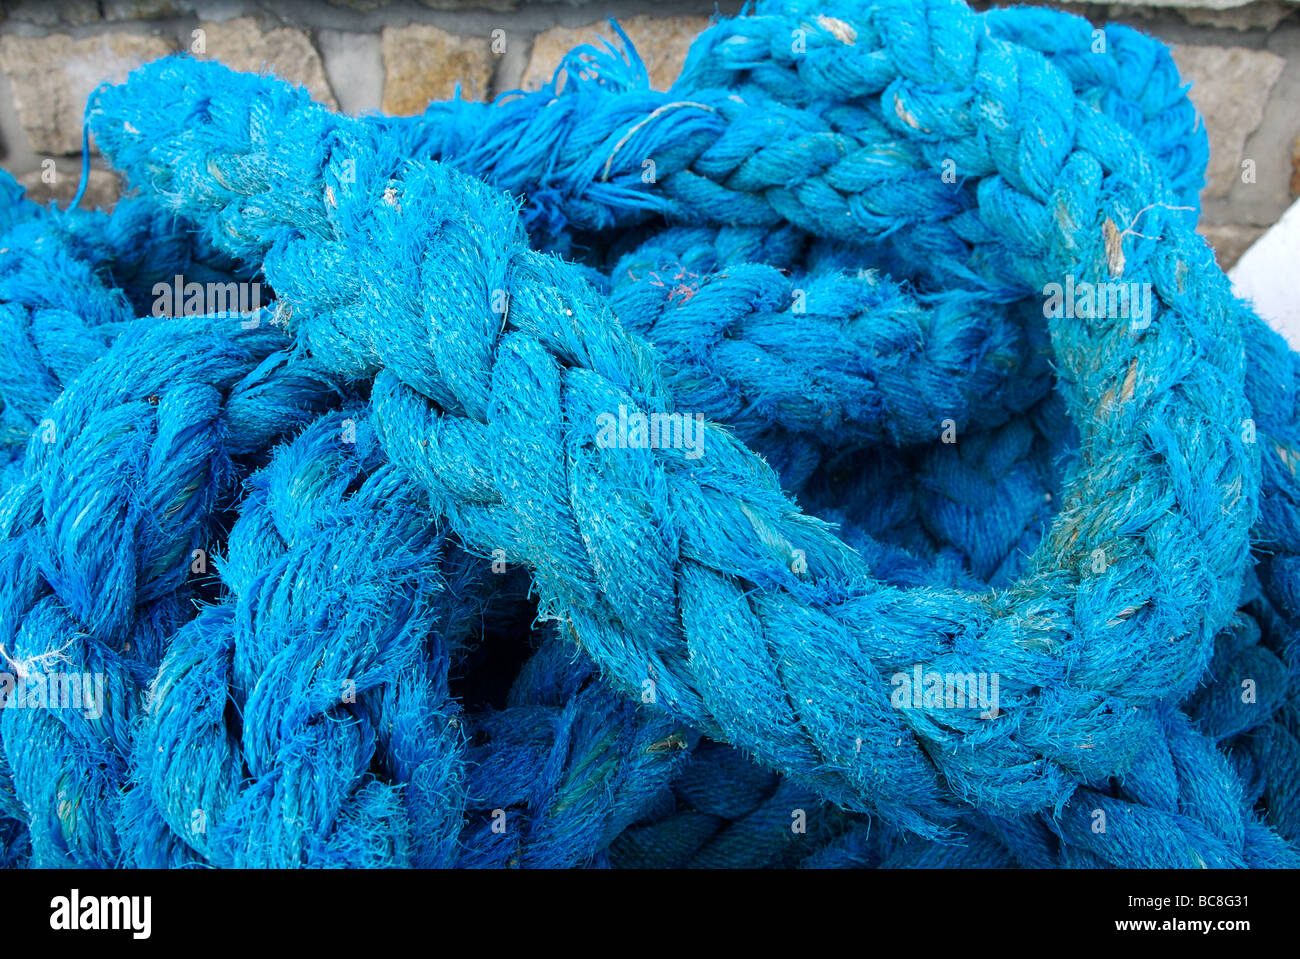 Twisted bright blue fishing rope, Roscoff, Brittany, France Stock Photo